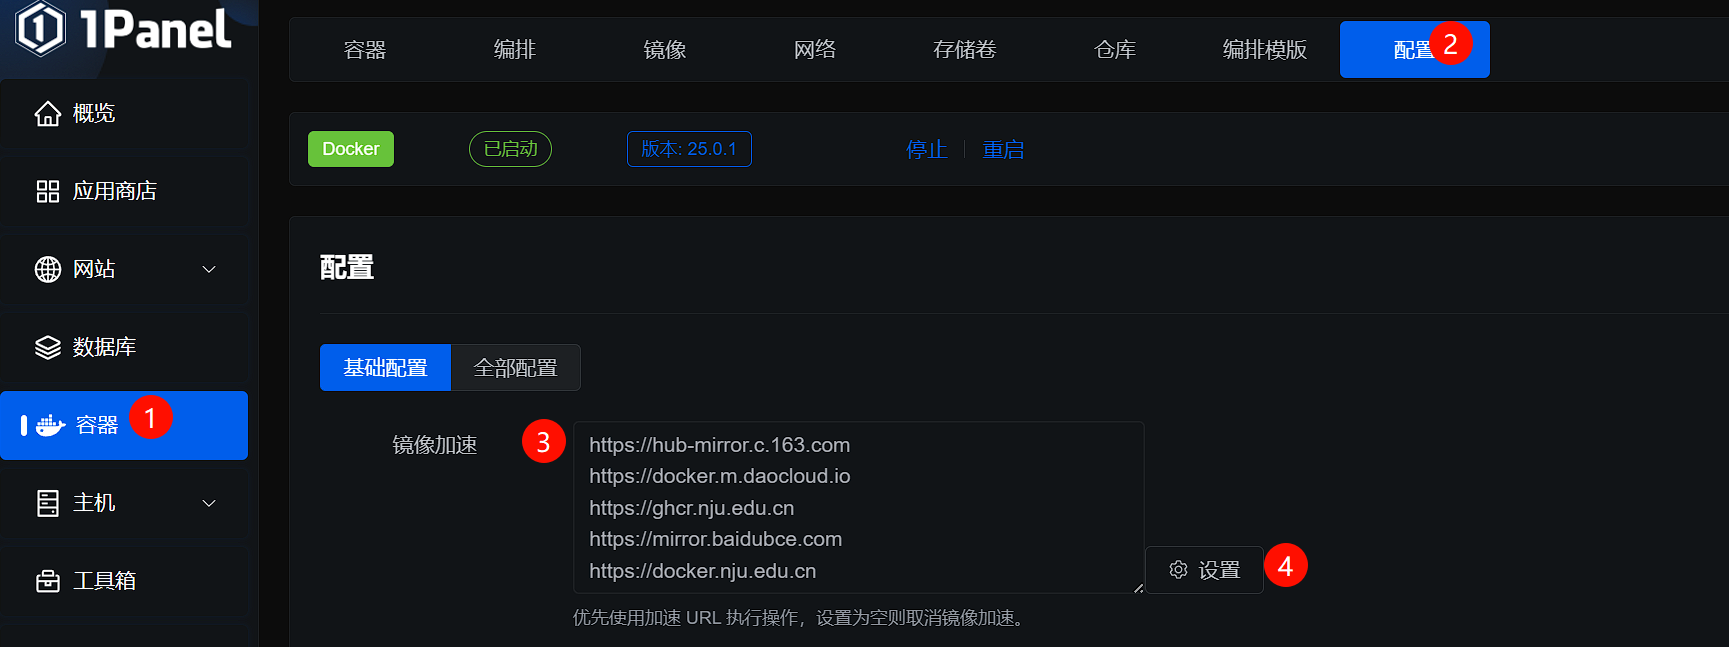 docker<span style='color:red;'>配置</span>github<span style='color:red;'>仓库</span>ghcr国内<span style='color:red;'>镜像</span>加速